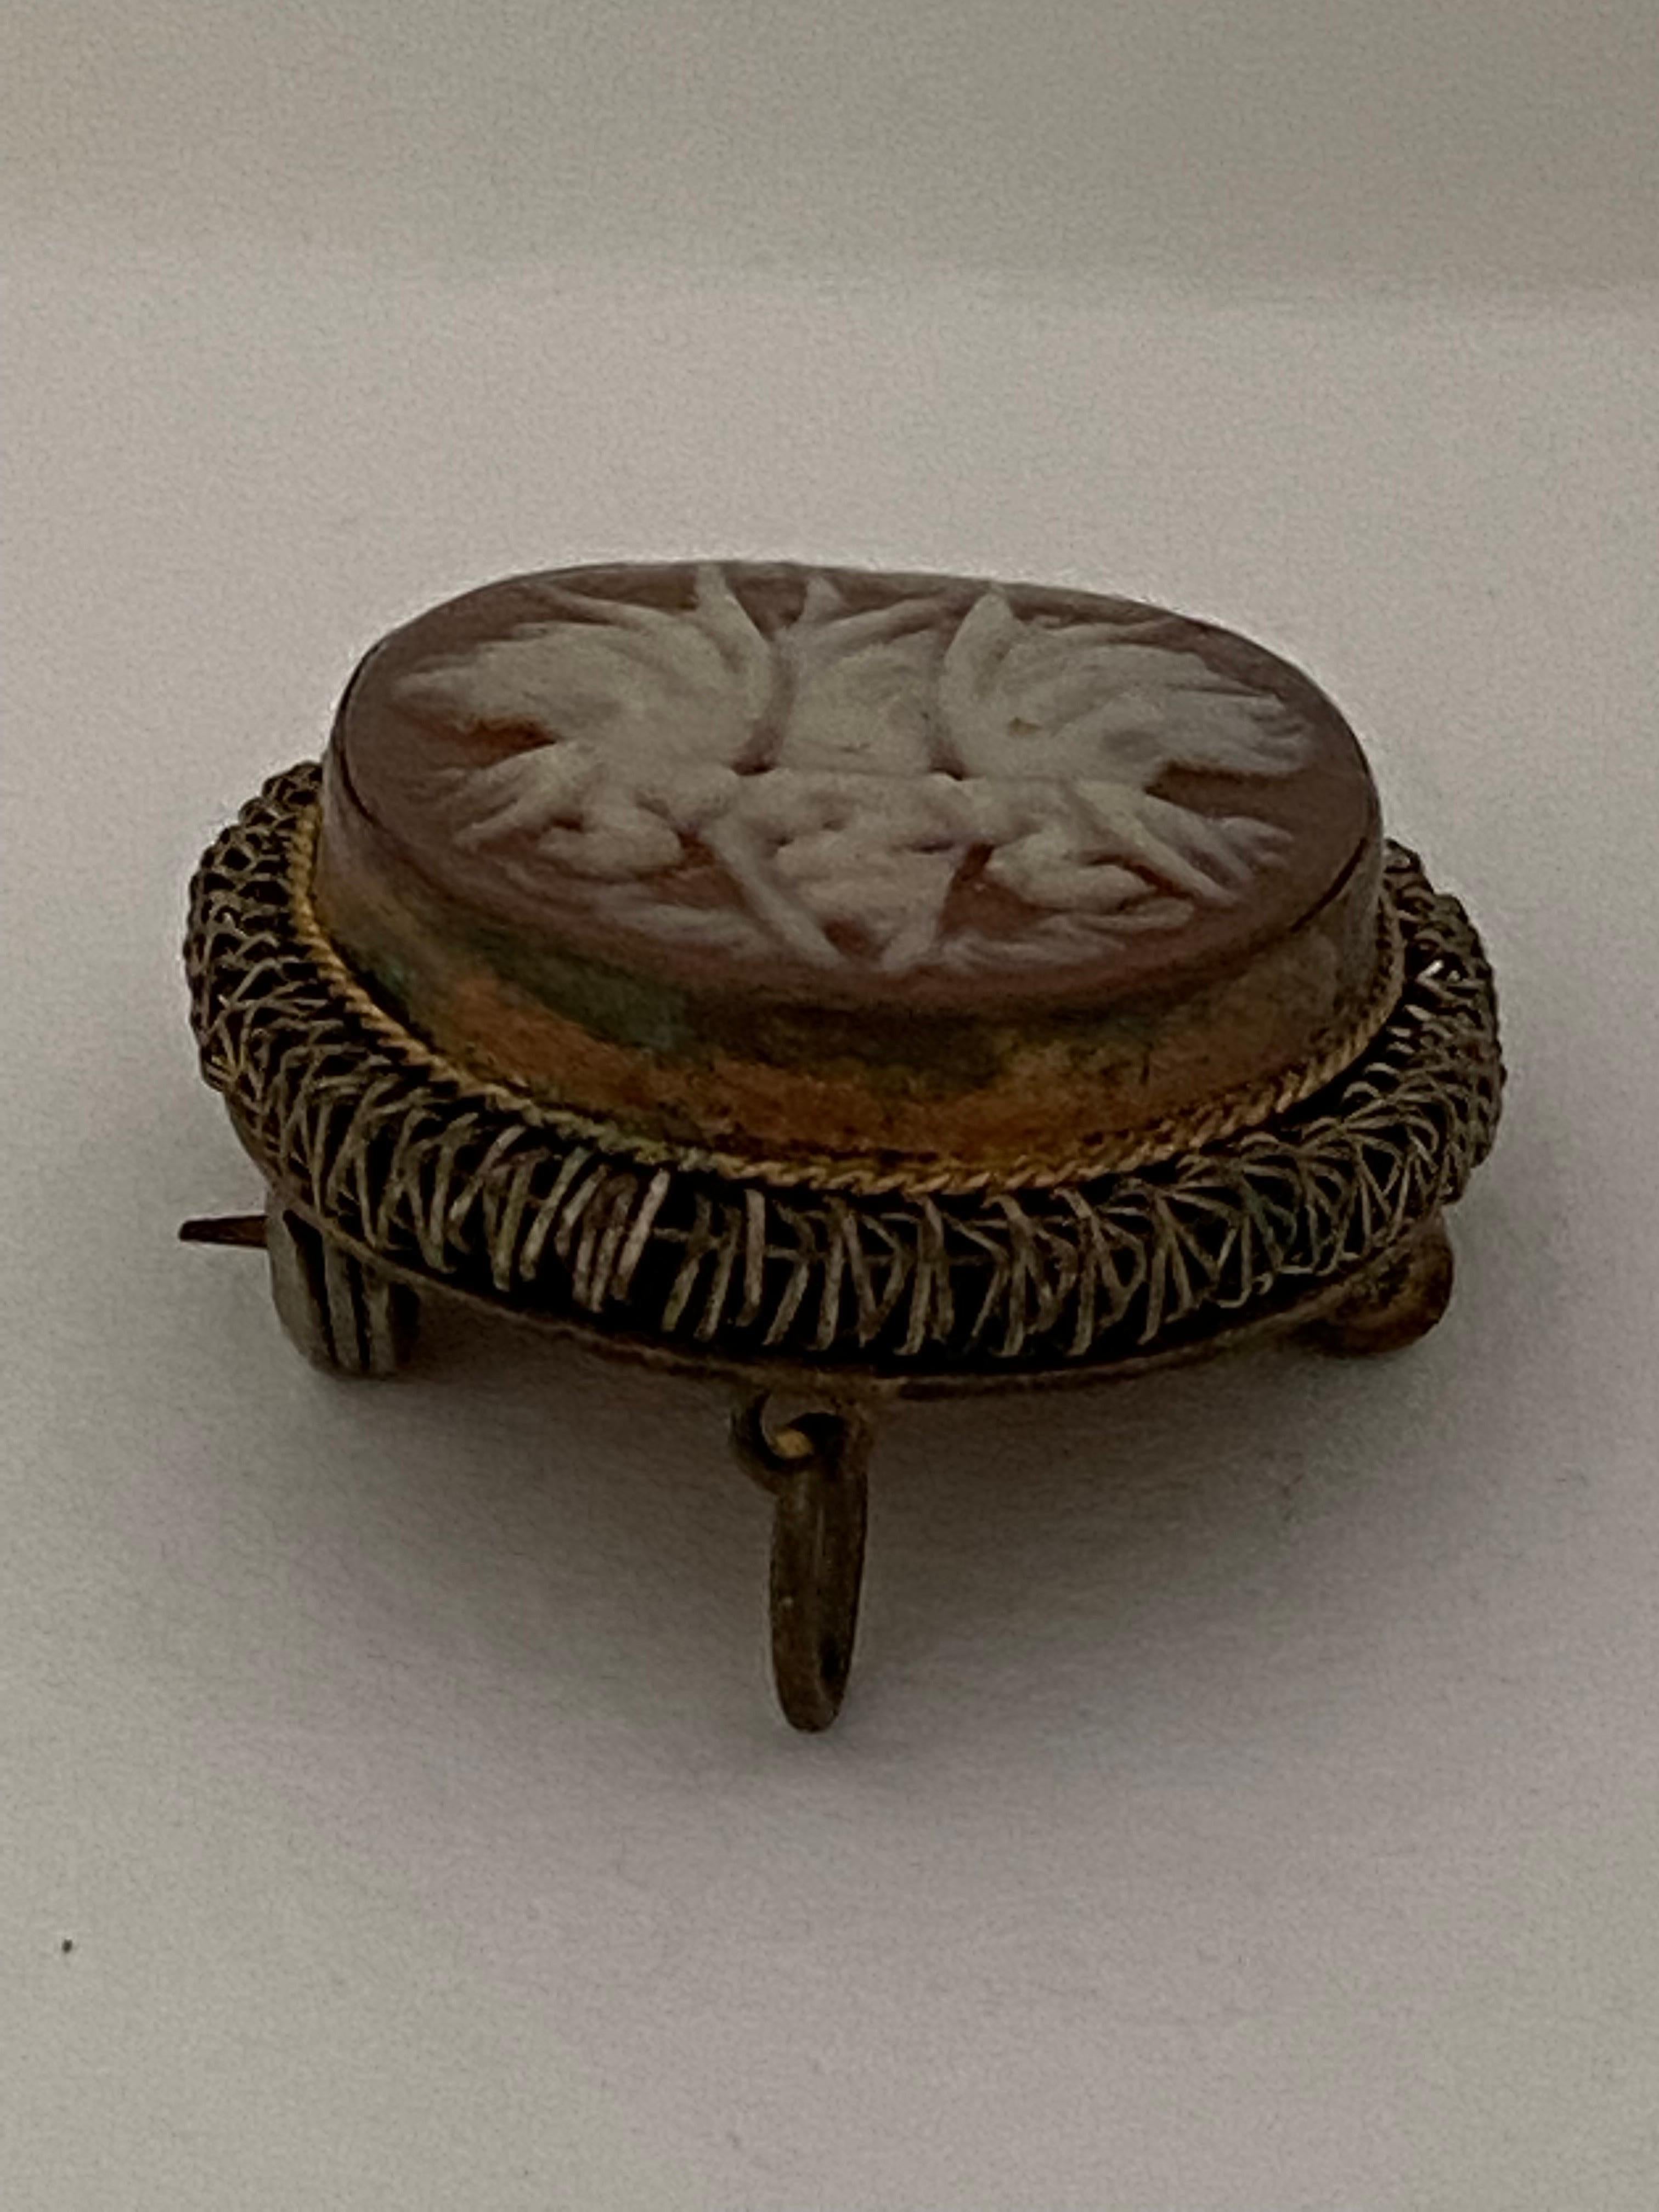 This beautiful antique piece is in good condition for its age. Visible signs of ageing and wear. some tarnishes on the back as shown and dents as shown. It can be as pendant necklace or can be wear as brooch. It is 30mm long by 25mm wide diameter.